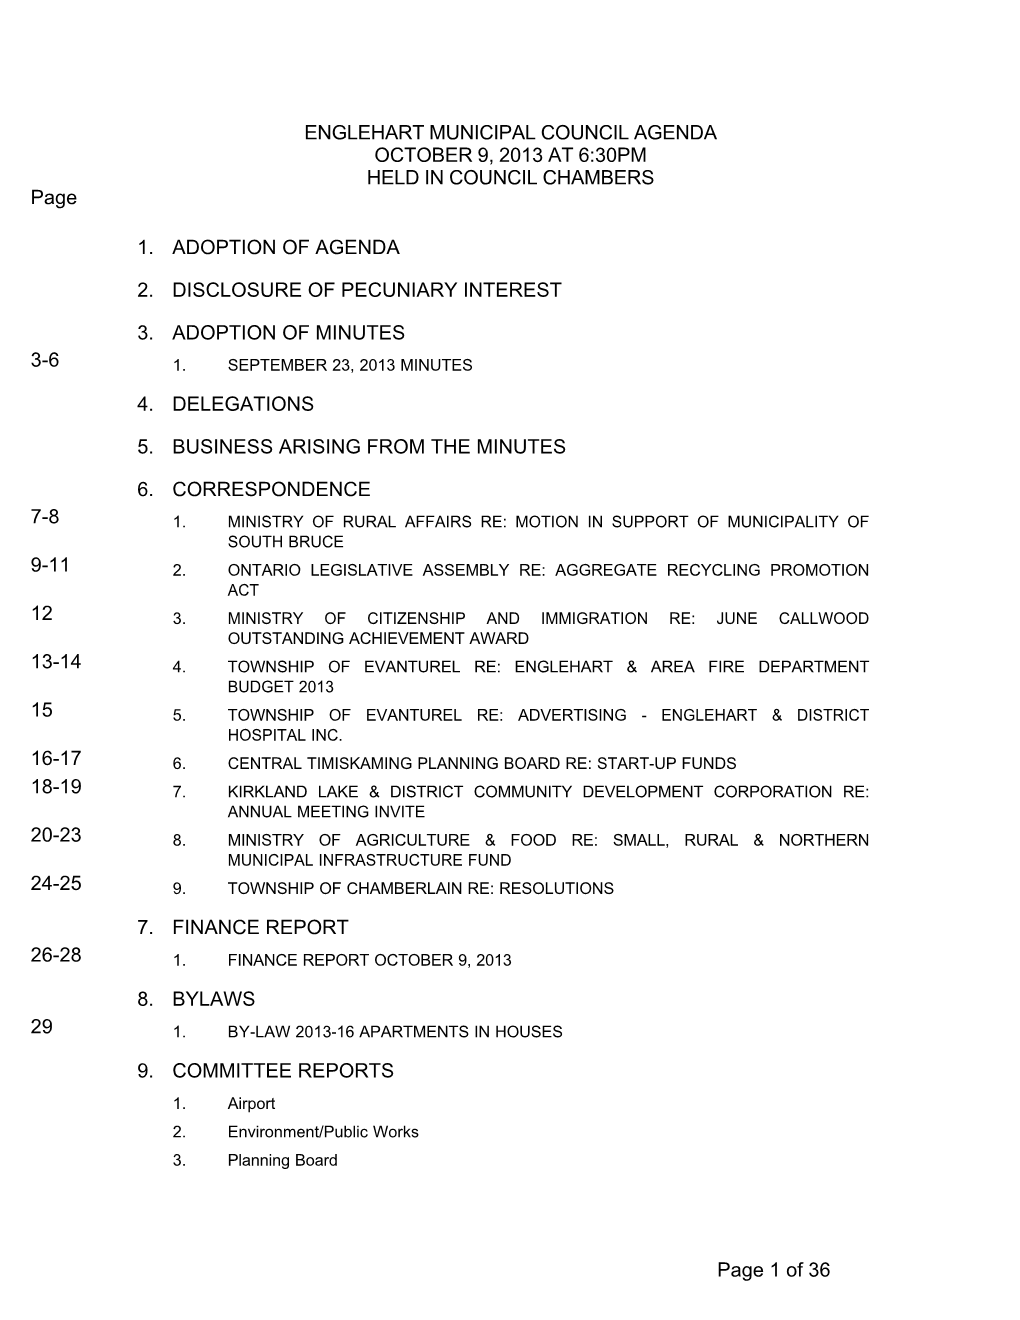 ENGLEHART MUNICIPAL COUNCIL AGENDA OCTOBER 9, 2013 at 6:30PM HELD in COUNCIL CHAMBERS Page 1. ADOPTION of AGENDA 2. DISCLOSURE O